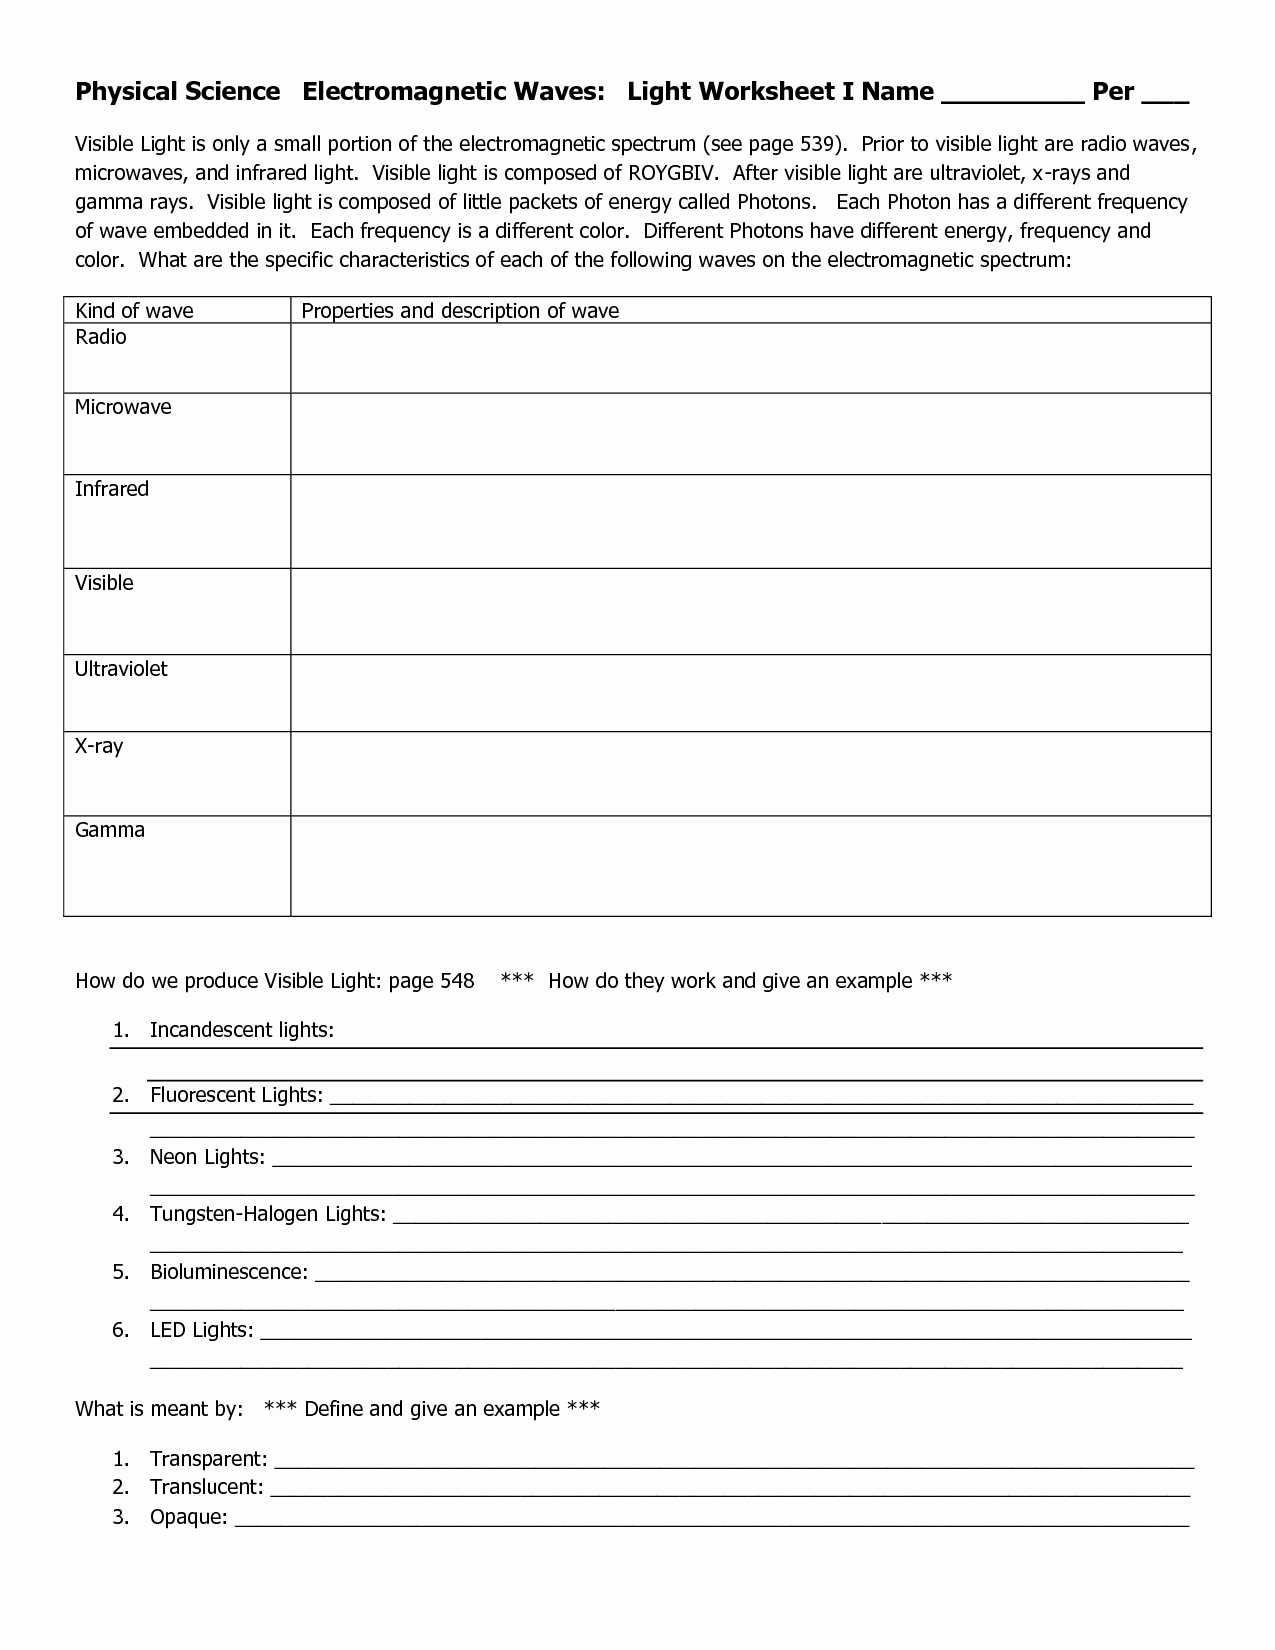 Atomic Structure Worksheet Answers Chemistry together with Worksheet isotopes and Ions Worksheet Carlos Lomas Worksheet for